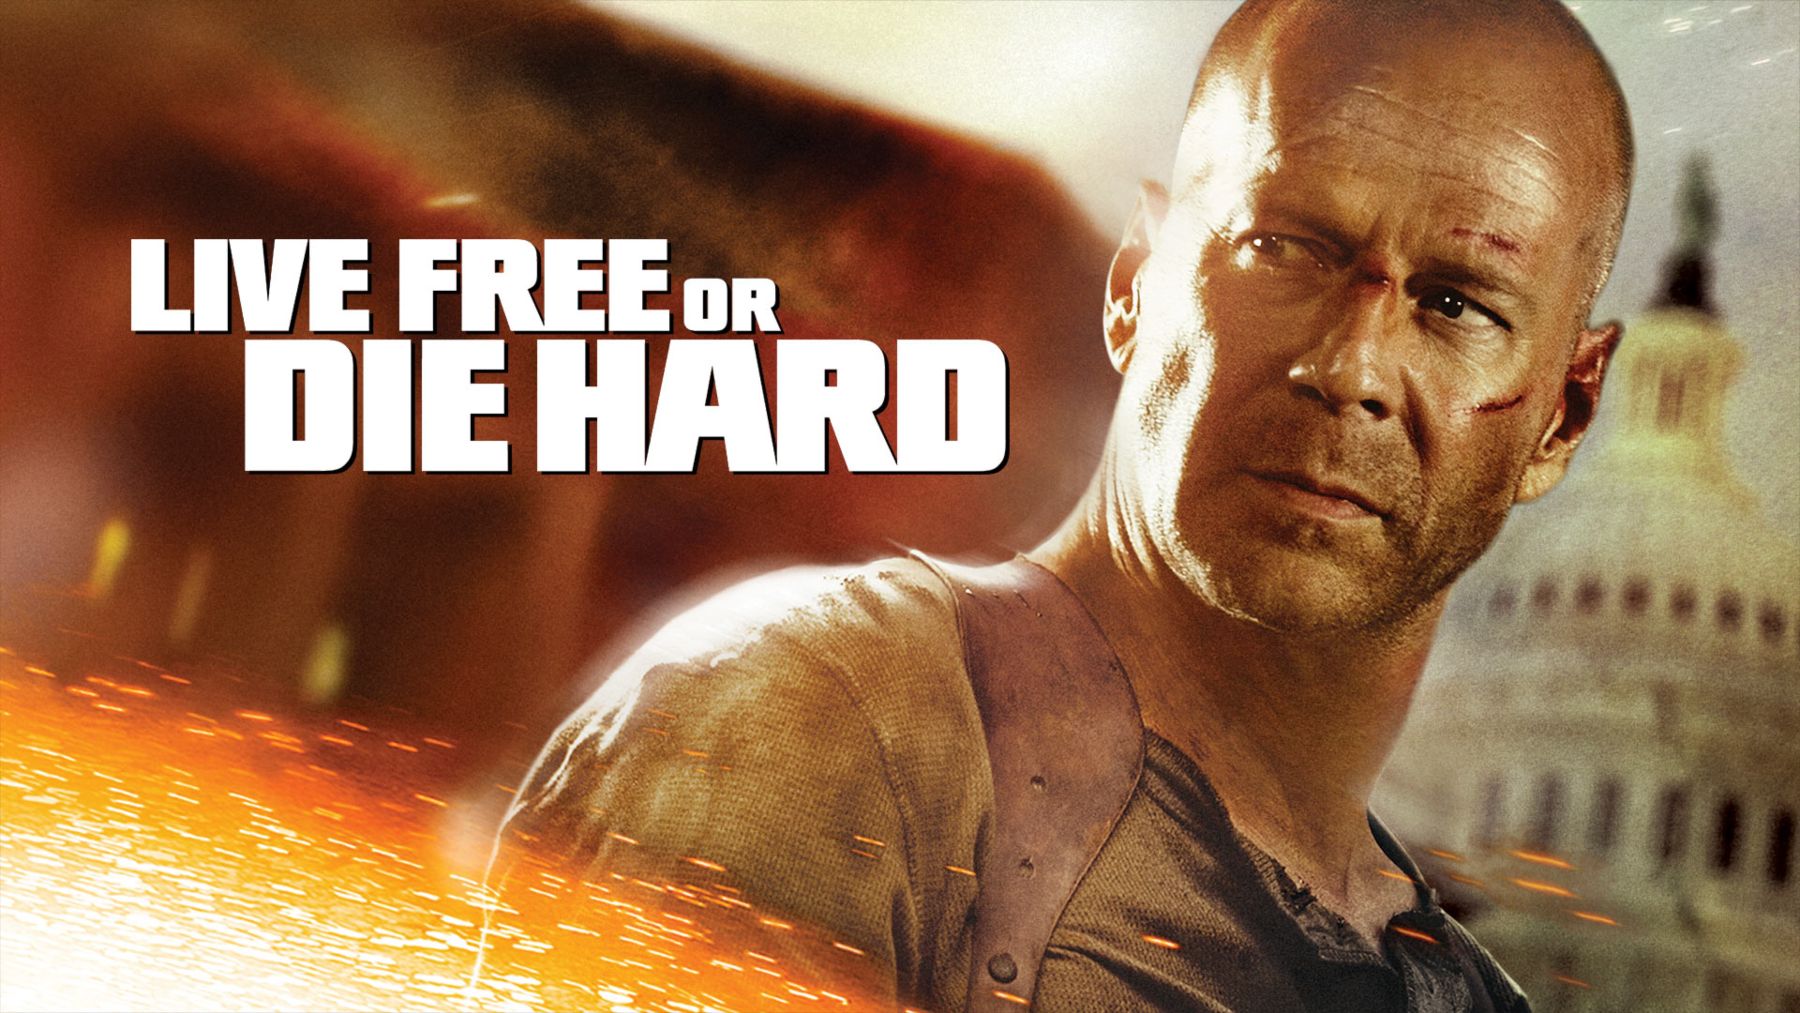 42-facts-about-the-movie-live-free-or-die-hard